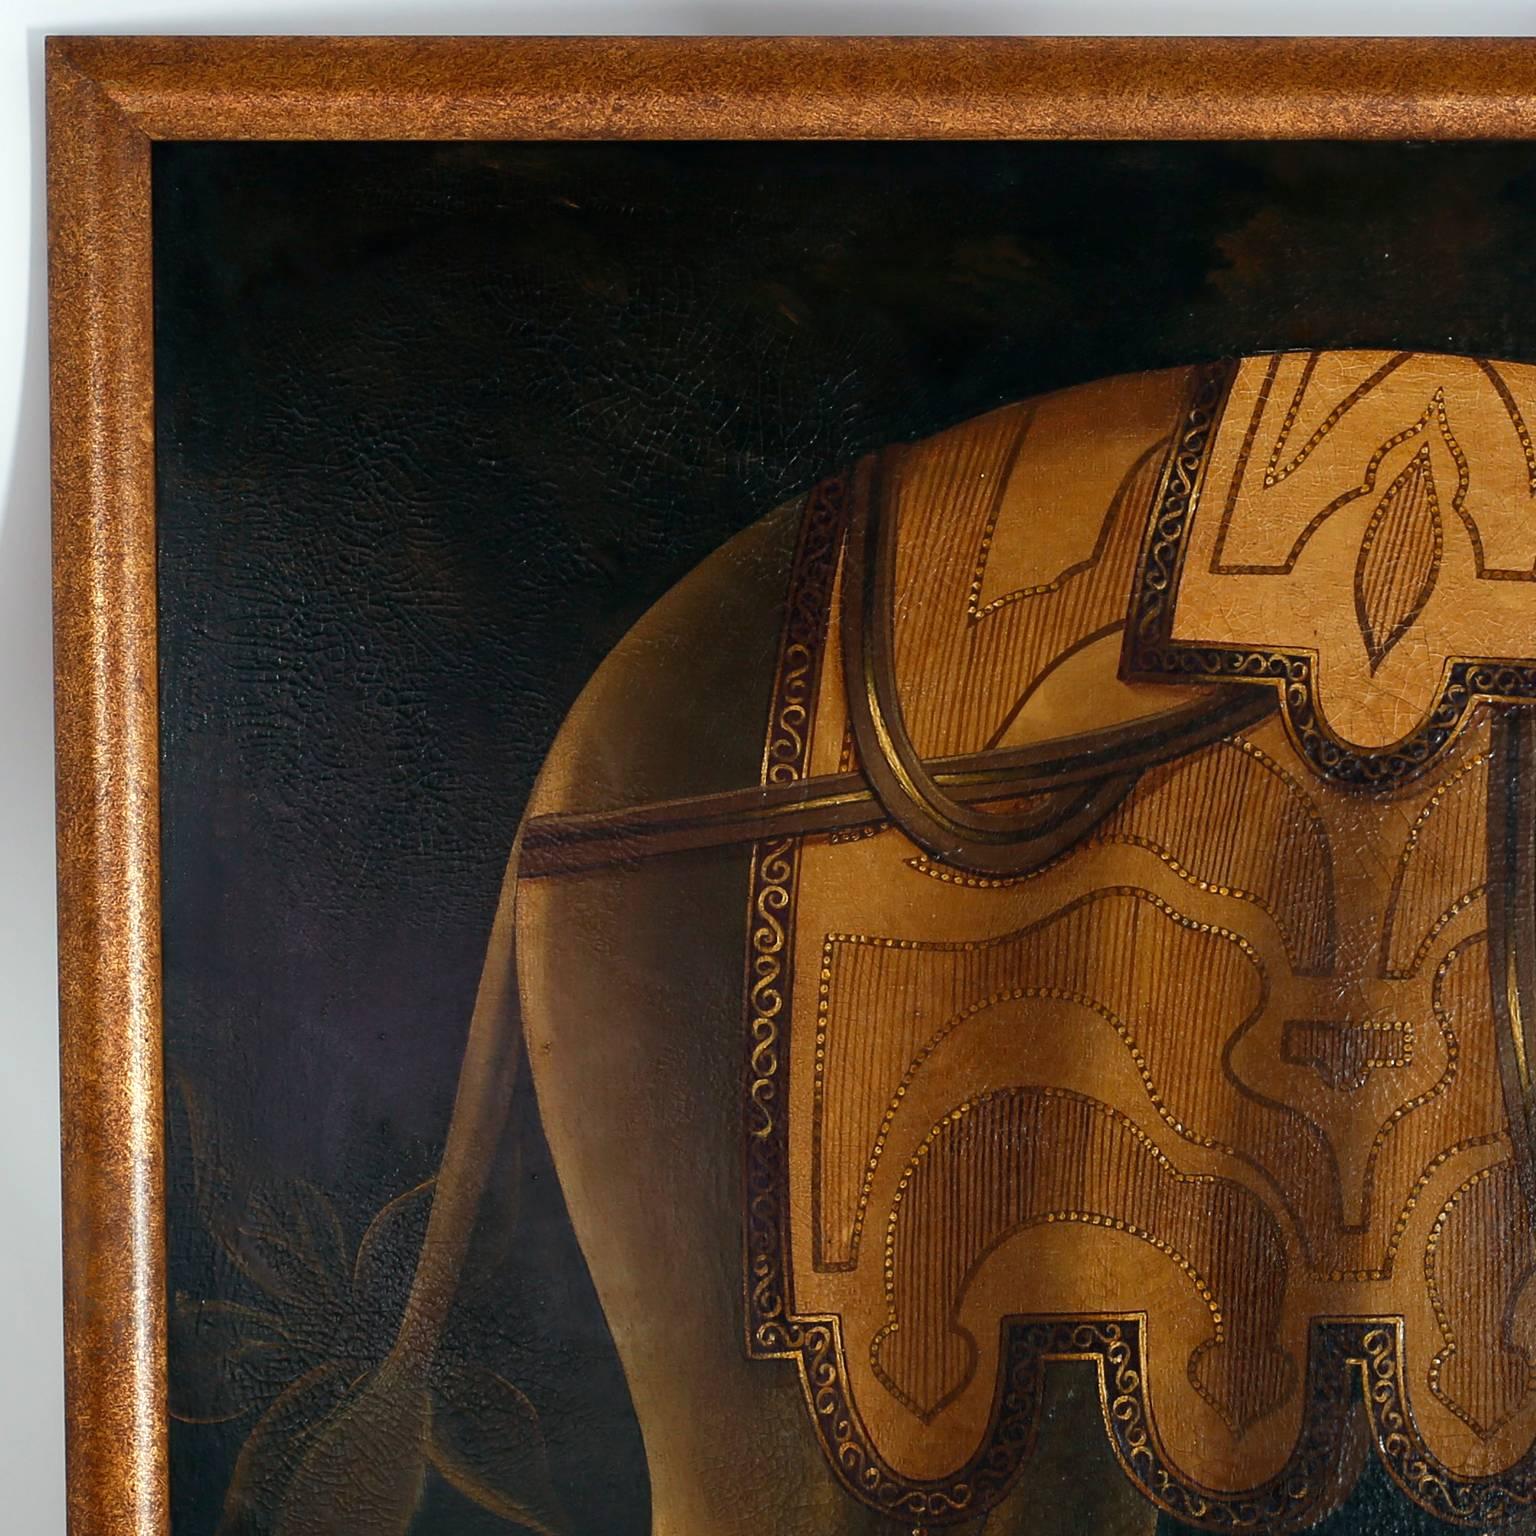 Oil painting on canvas of a well dressed elephant that manages to be both amusing and moody. Giving a nod to Victorian parlor paintings but with a modern twist. This striking painting has contrived aging and
patina. Signed Reginald Baxter in the